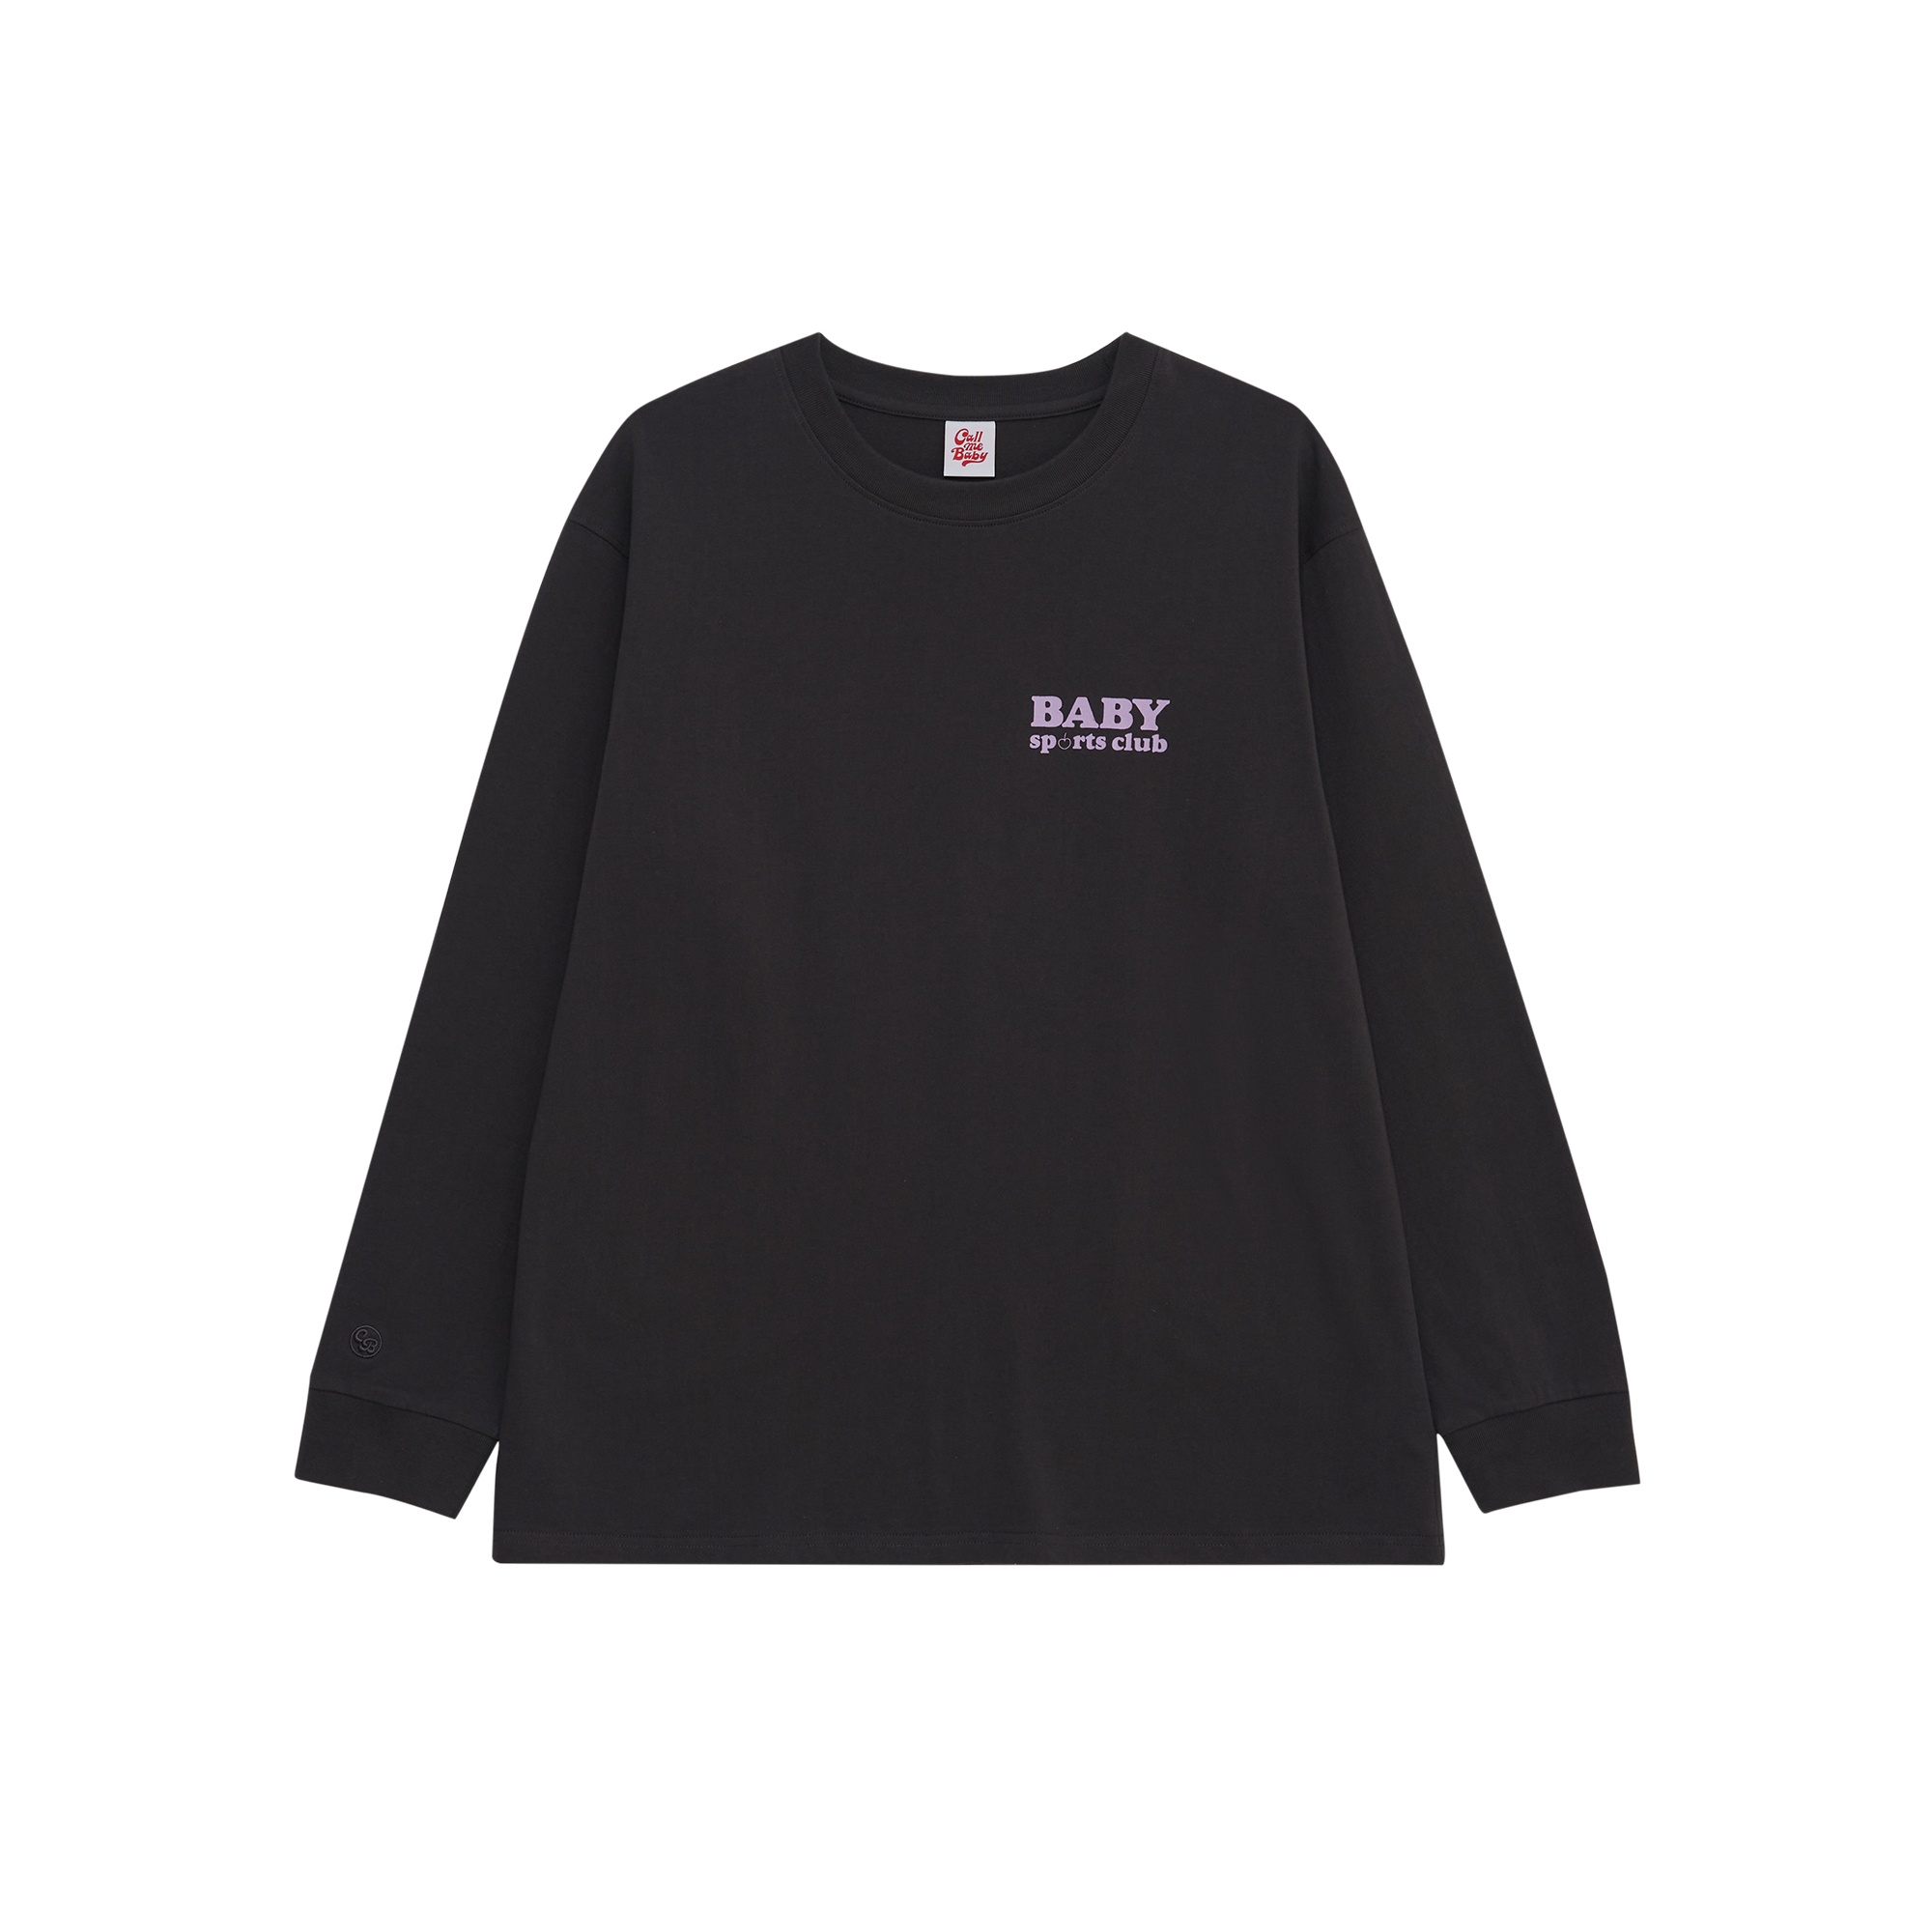 [Call Me Baby] Baby Sports Club Long Sleeve _ Charcoal